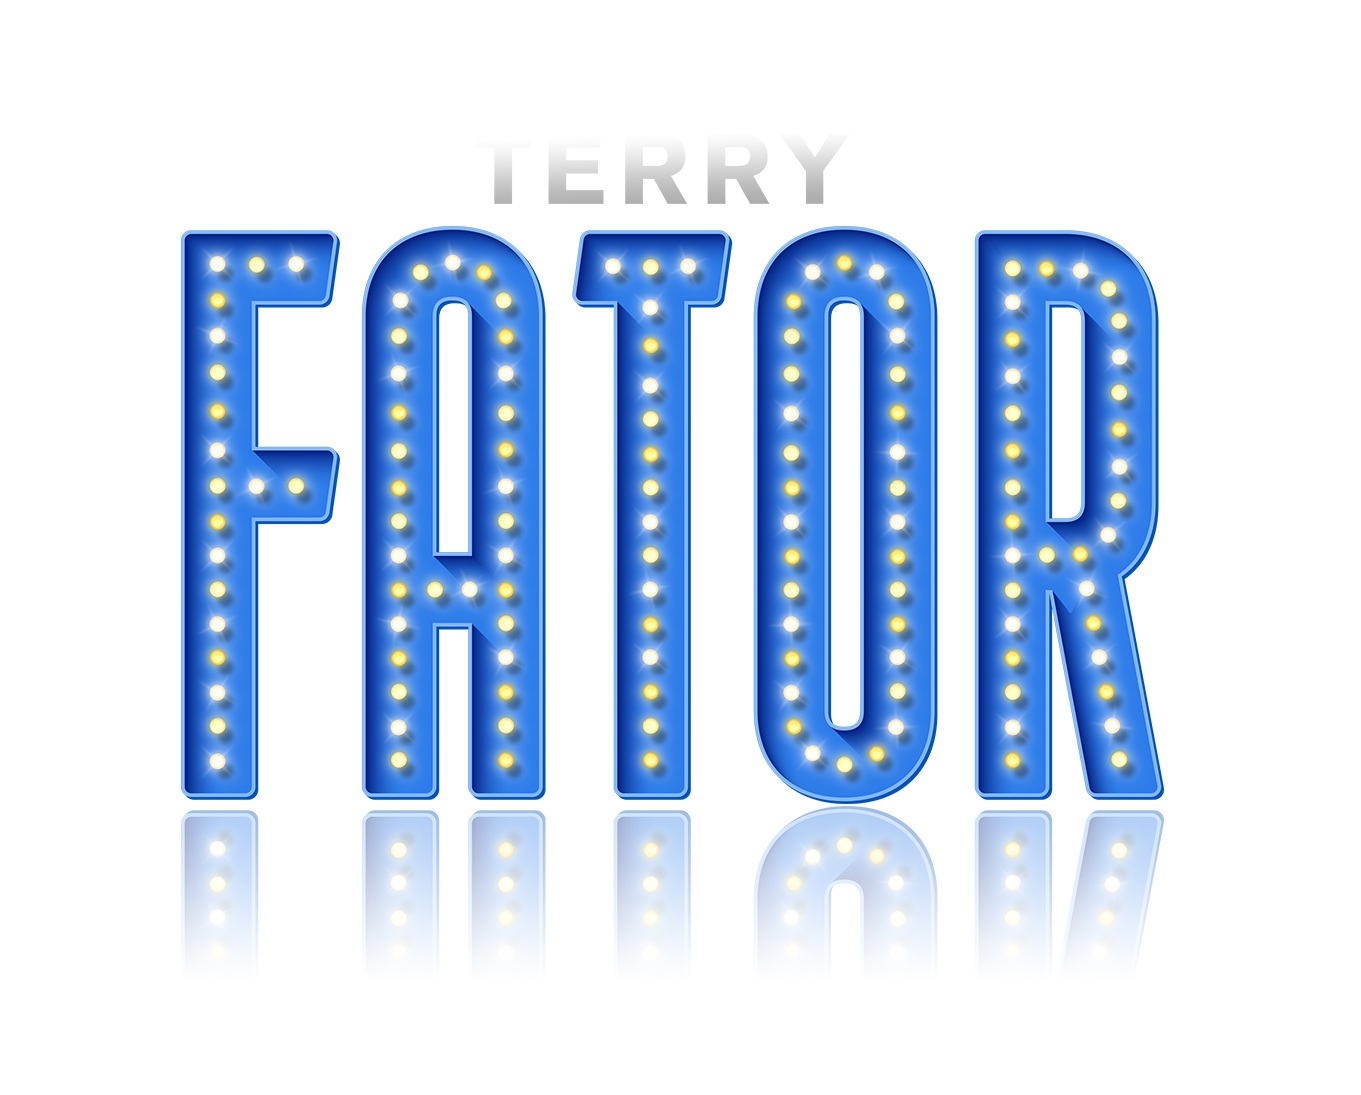 Terry Fator Store